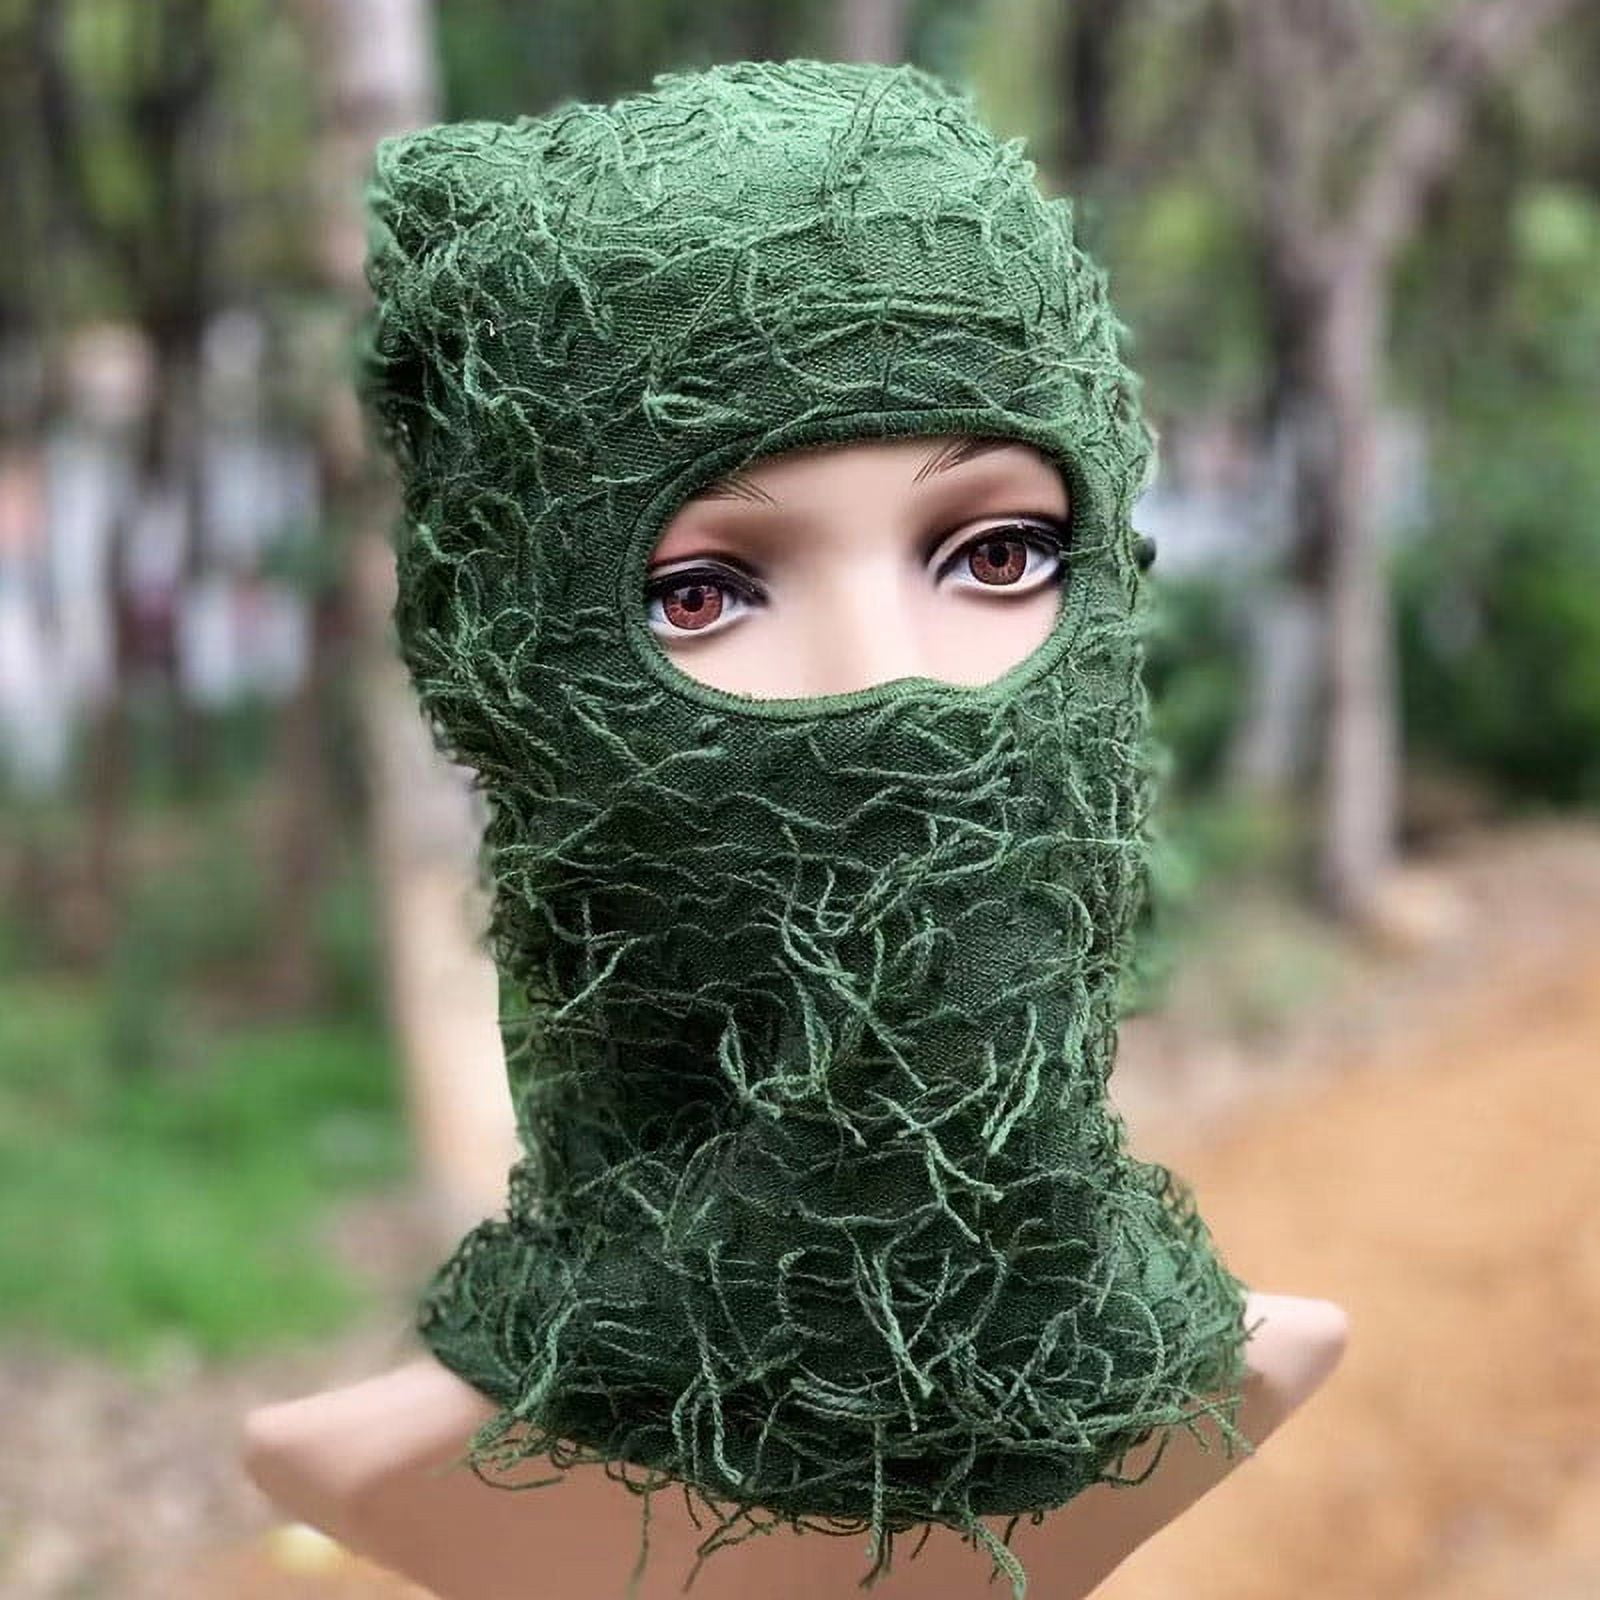 Holloyiver Distressed Balaclava Ski Mask for Men and Women - Knitted  Balaclava Distressed Windproof Shiesty Full Face Mask Cold Weather Green